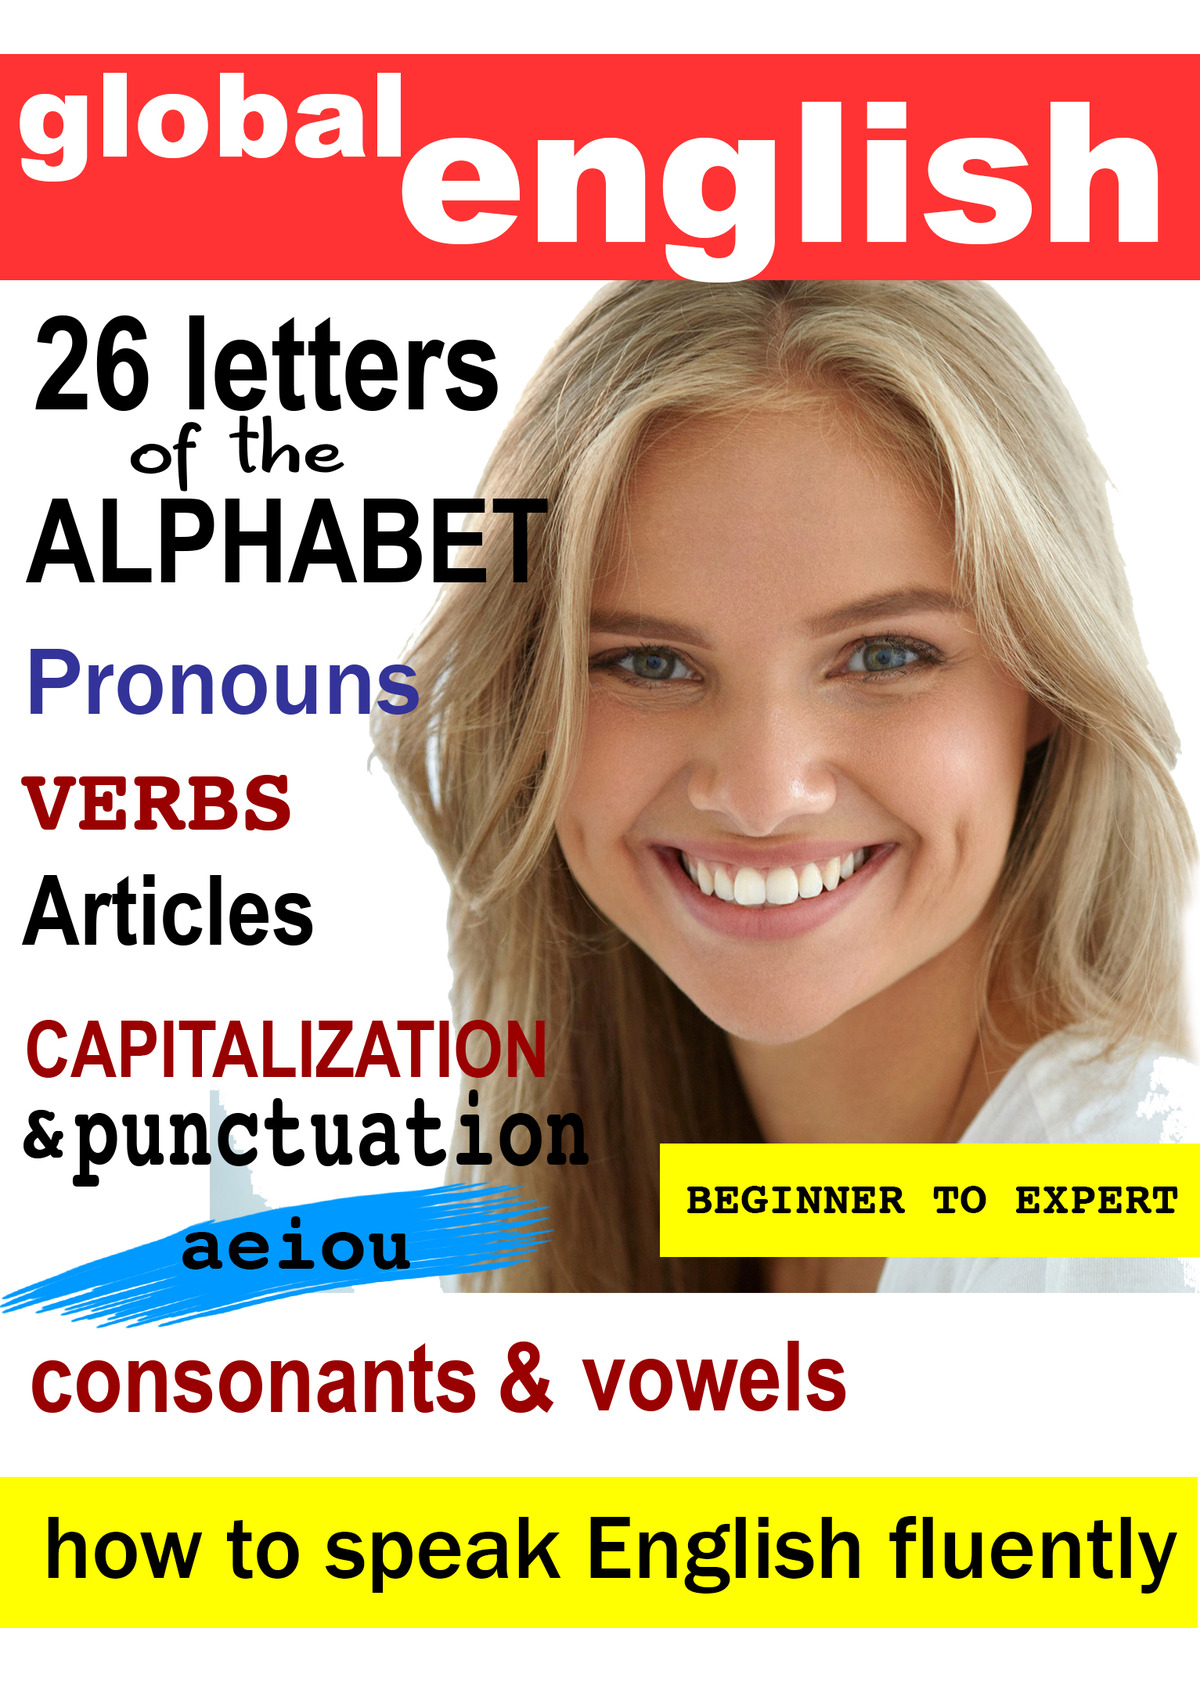 K7001 - The Alphabet, Consonants & Vowels, Capitalization & Punctuation, Personal Pronouns, The Verb 'to be', Articles